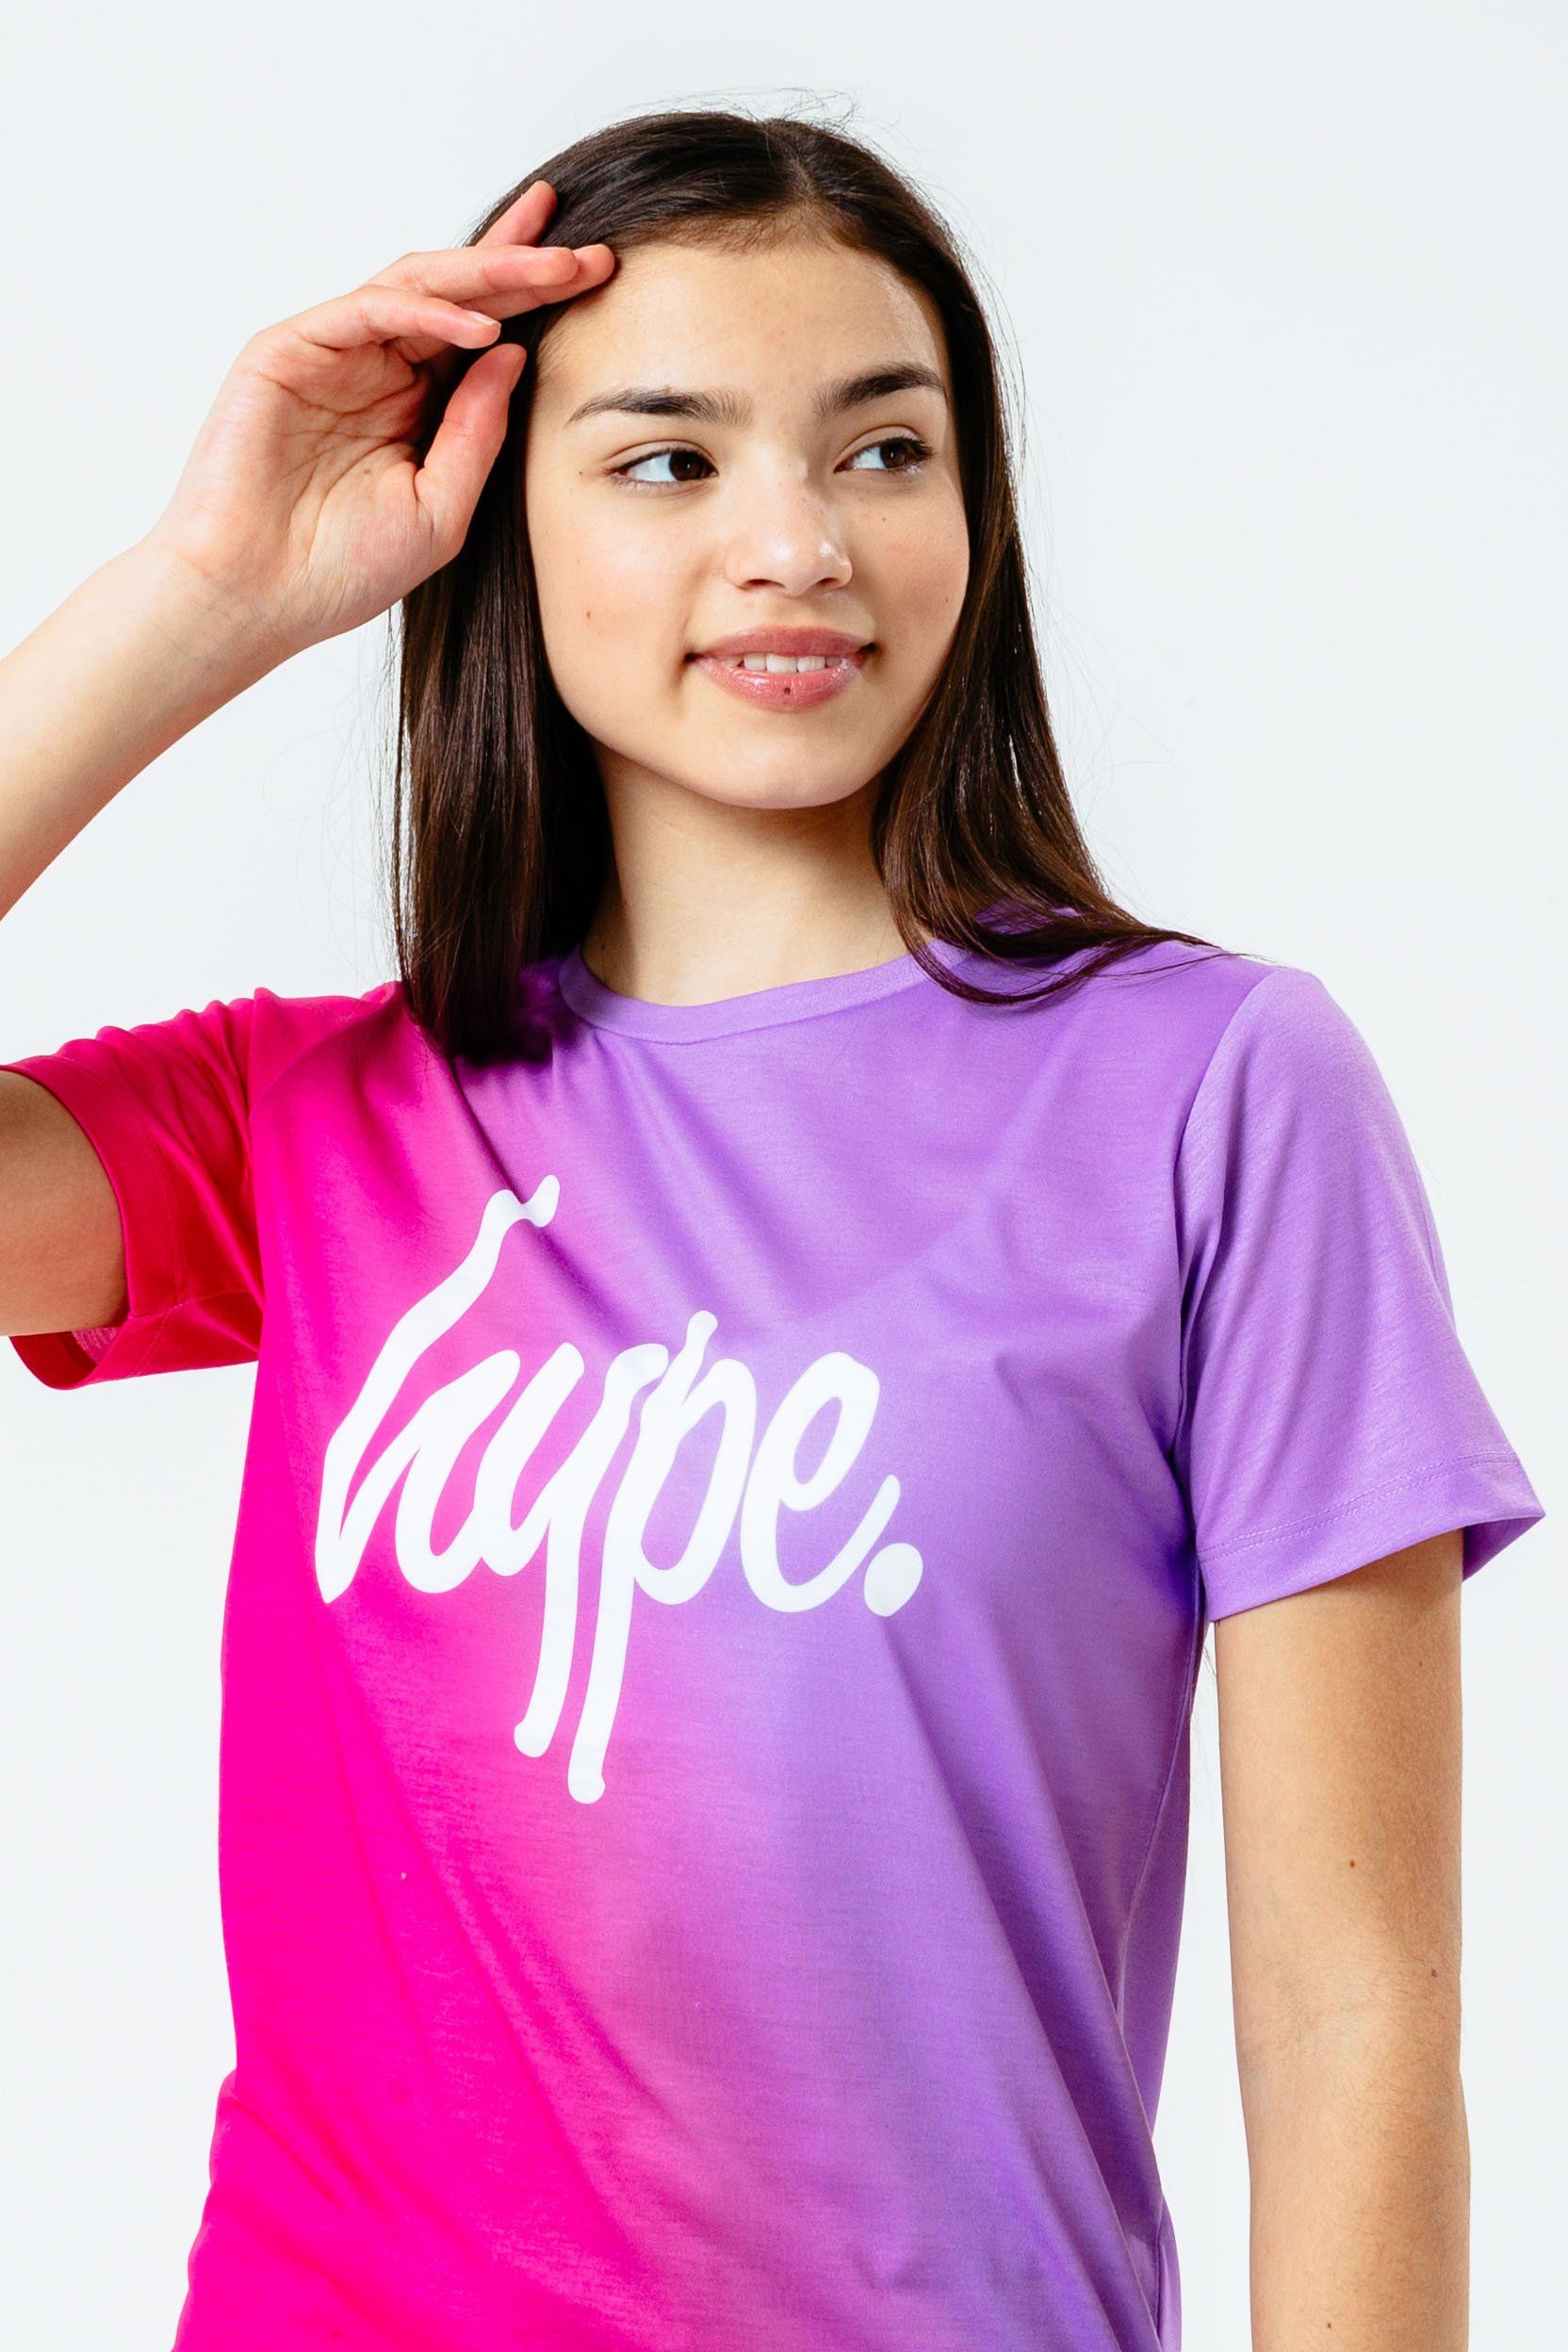 The HYPE. Pink Purple Fade Kids T-shirt, your perfect go-to tee. Designed in a 95% Polyester and 5% Elastane fabric base for supreme comfort and perfect amount of breathable space. Featuring our signature fade effect in a pink and purple colour palette. Highlighting a crew neckline and short sleeves for a classic fit. Finished with the iconic HYPE. script logo in a contrasting white across the front. Wear with denim jeans, oversized jacket and trainers to complete the look. Machine washable.